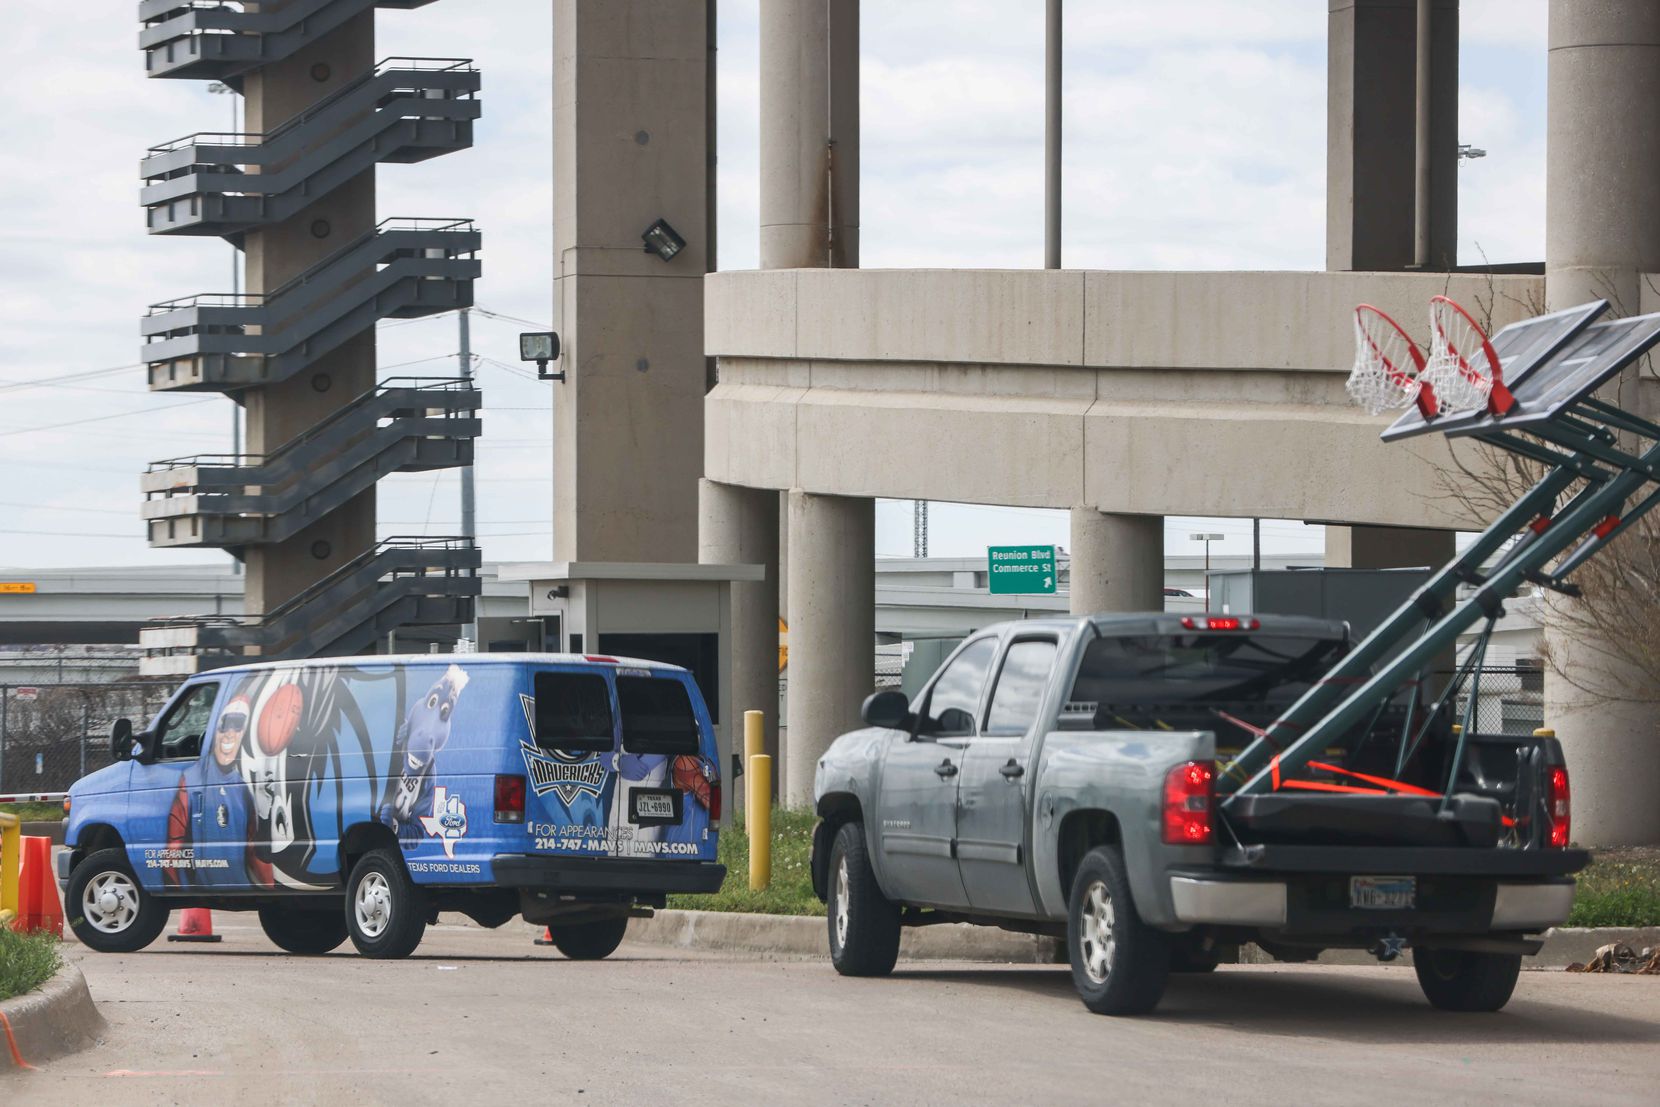 A van with the NBA team Mavericks logo, arrives along with a pickup carrying two basketball hoops to the Kay Bailey Hutchison Convention Center in Dallas on Thursday, March 18, 2021, where 200 unaccompanied immigrant children arrived Wednesday evening. The convention center serves as an emergency intake site to hold teens who have apprehended in increasing numbers at the U.S.-Mexico border.